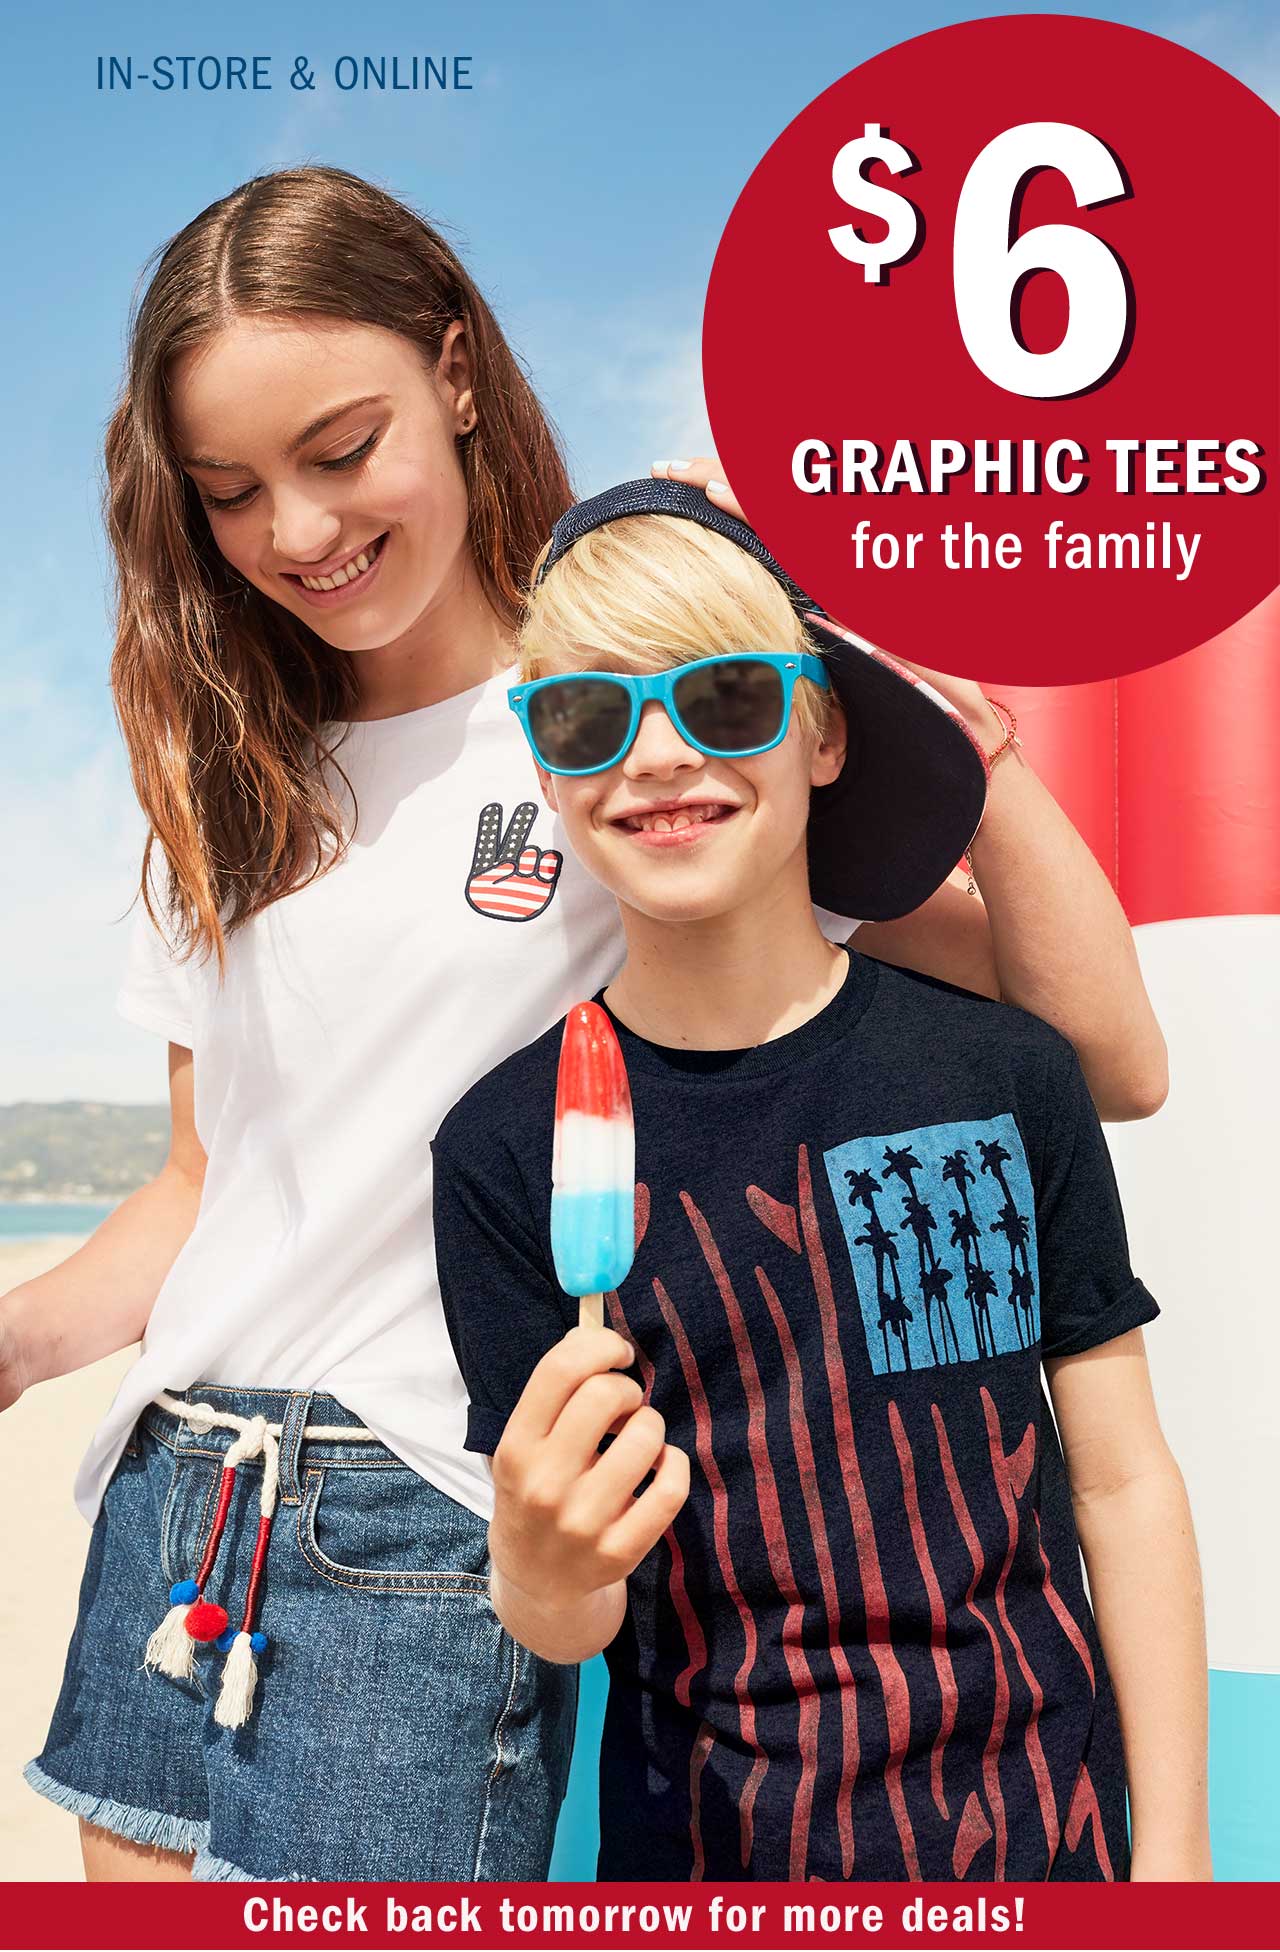 $6 GRAPHIC TEES for the family